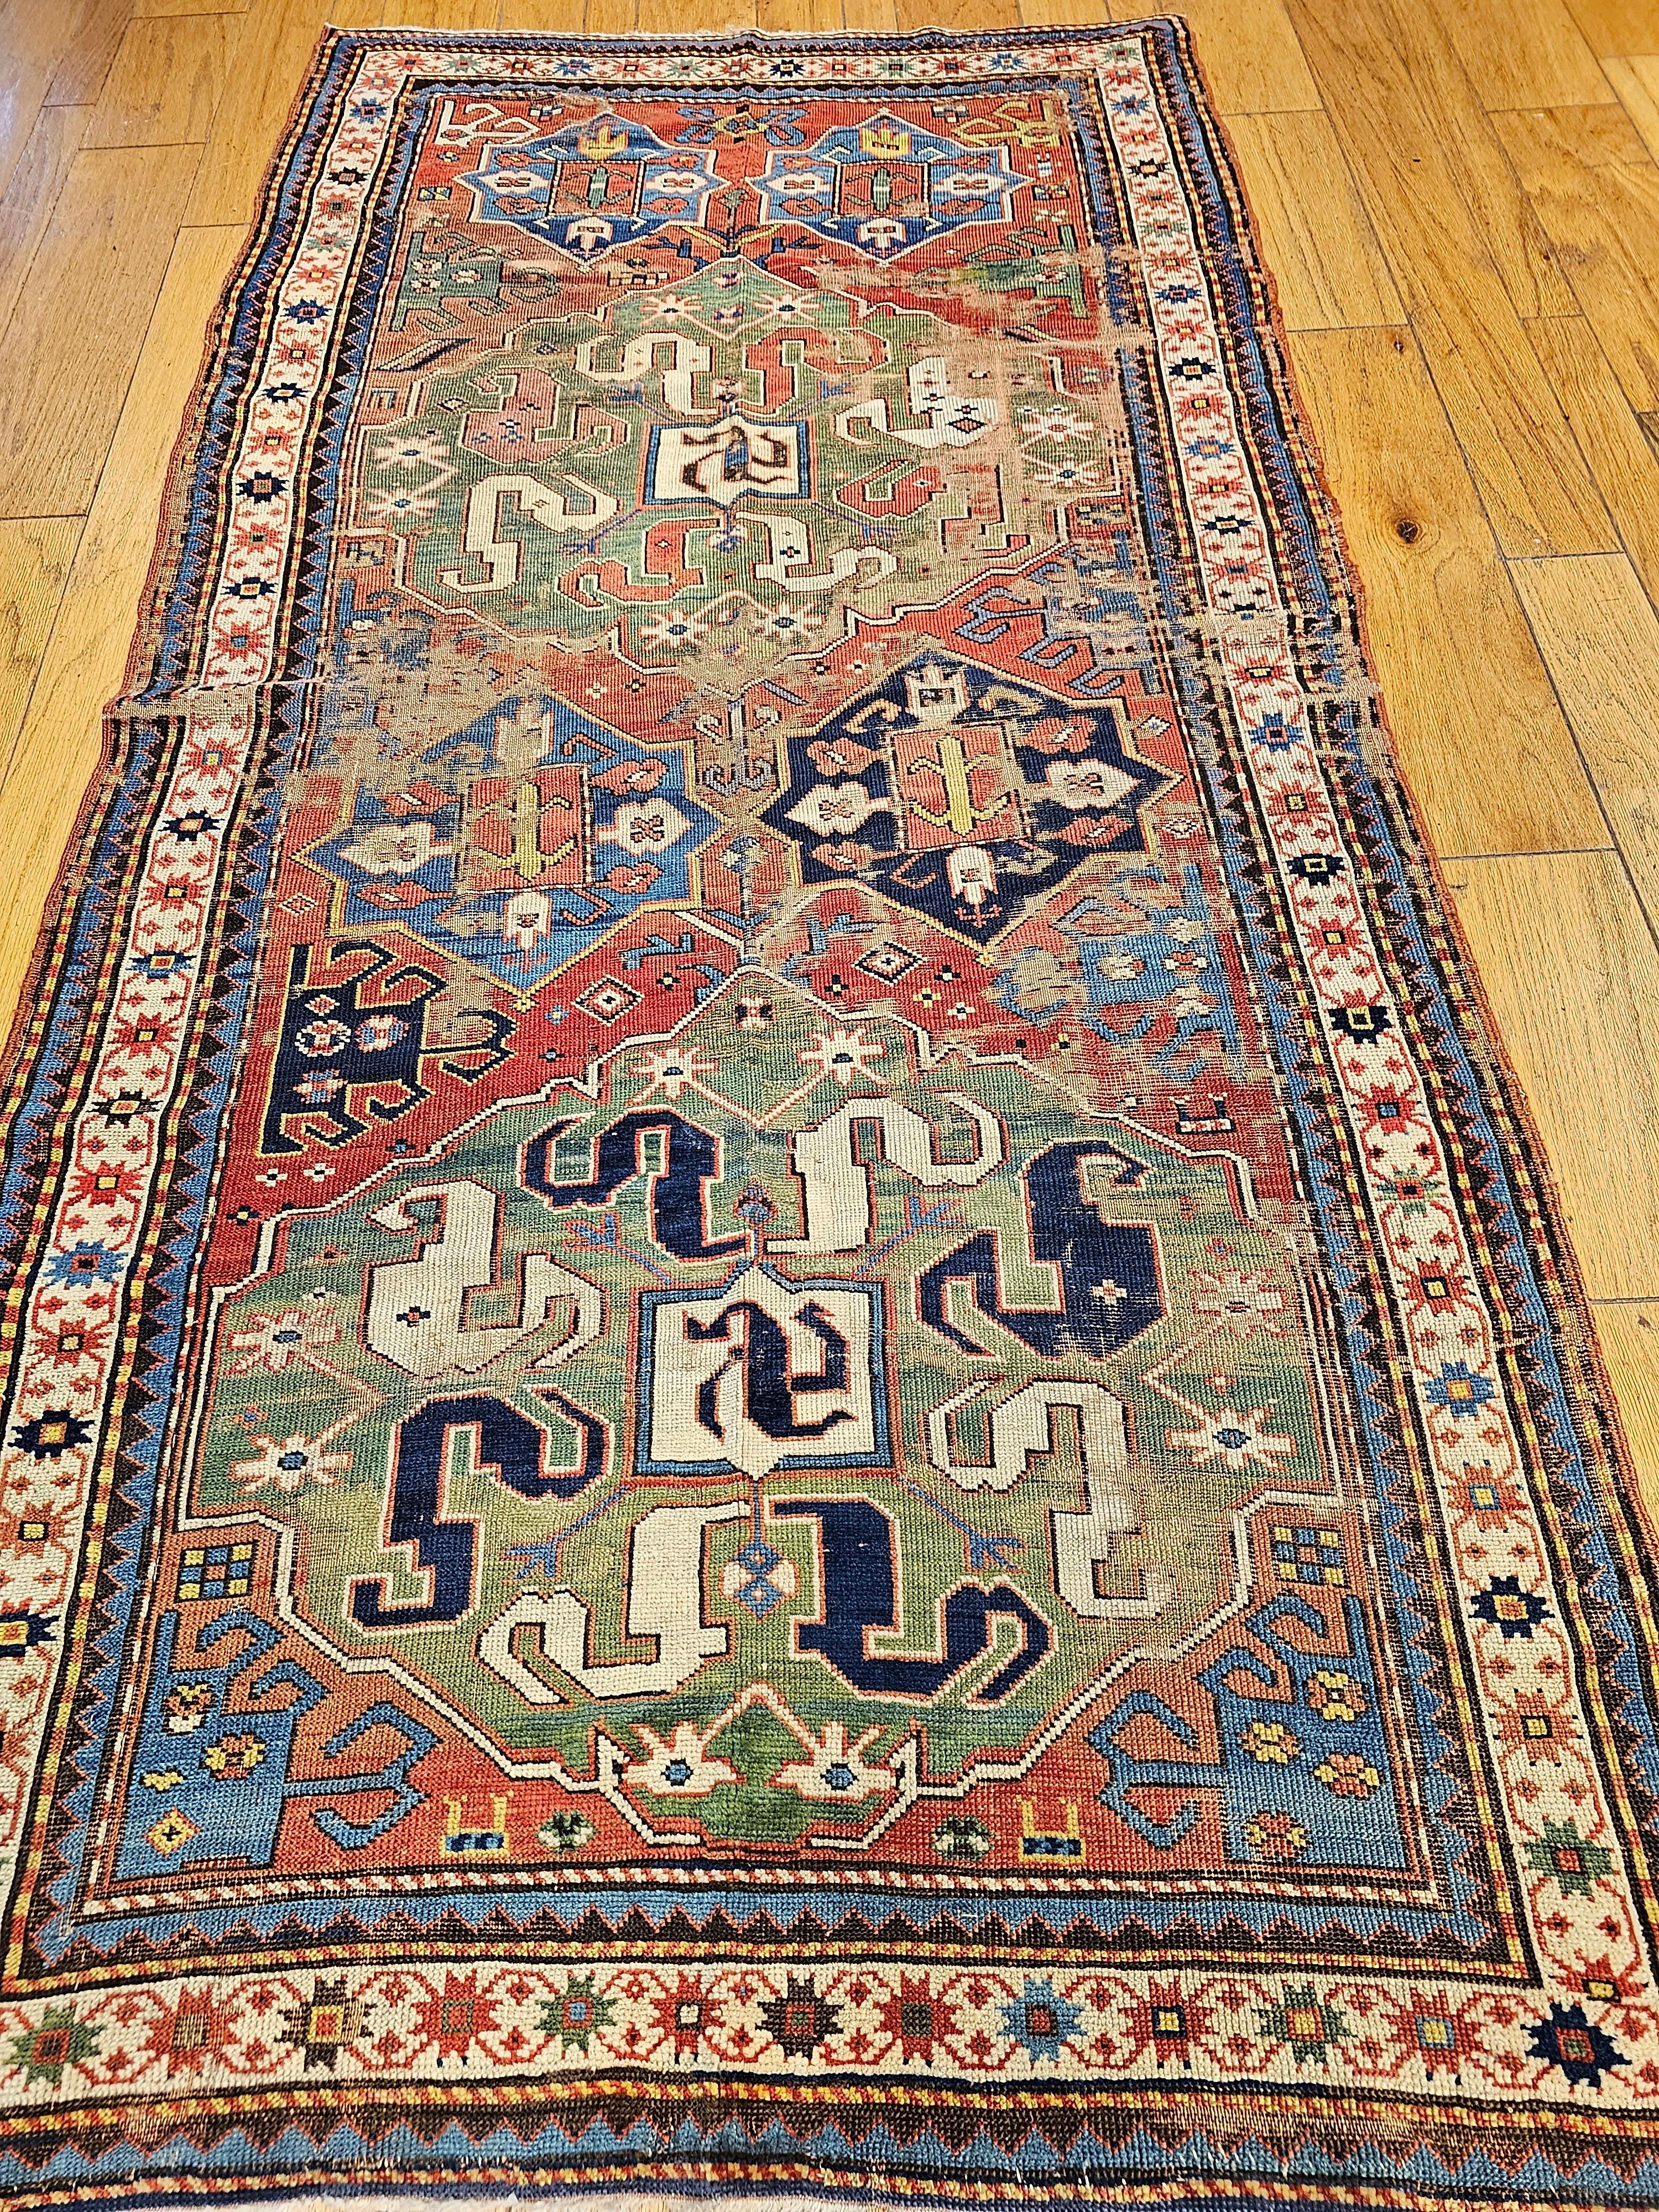  The Chondsoresk carpet also known as Cloudband Kazak is from the mid-1800s from the village of Chondoresh in the Karabagh area of the Caucasus mountains. This beautiful Chondsoresk has two large 